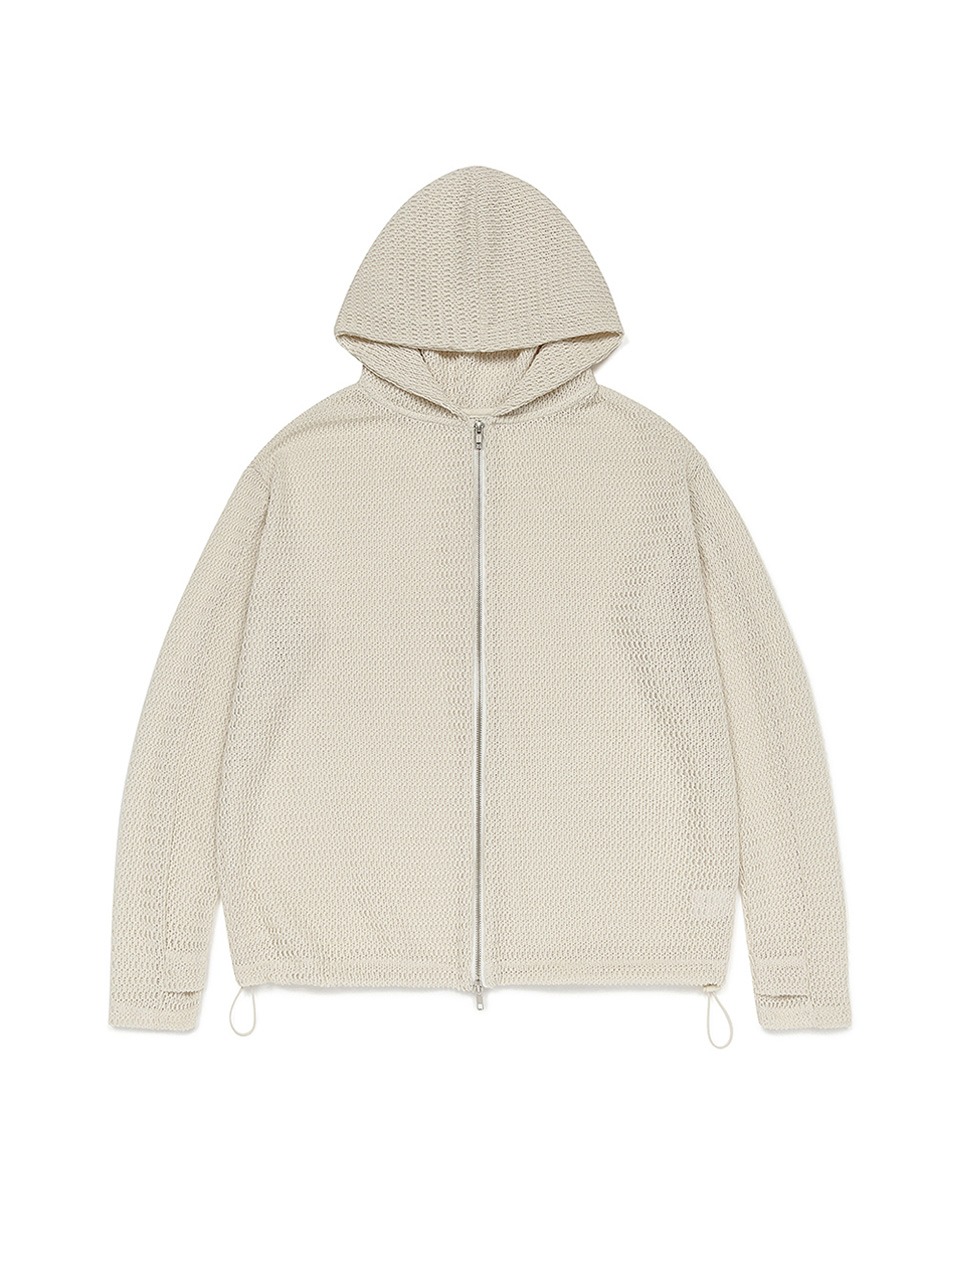 PARAKEET - WAVE STRUCTURE KNITTED ZIP UP HOODIE (IVORY)